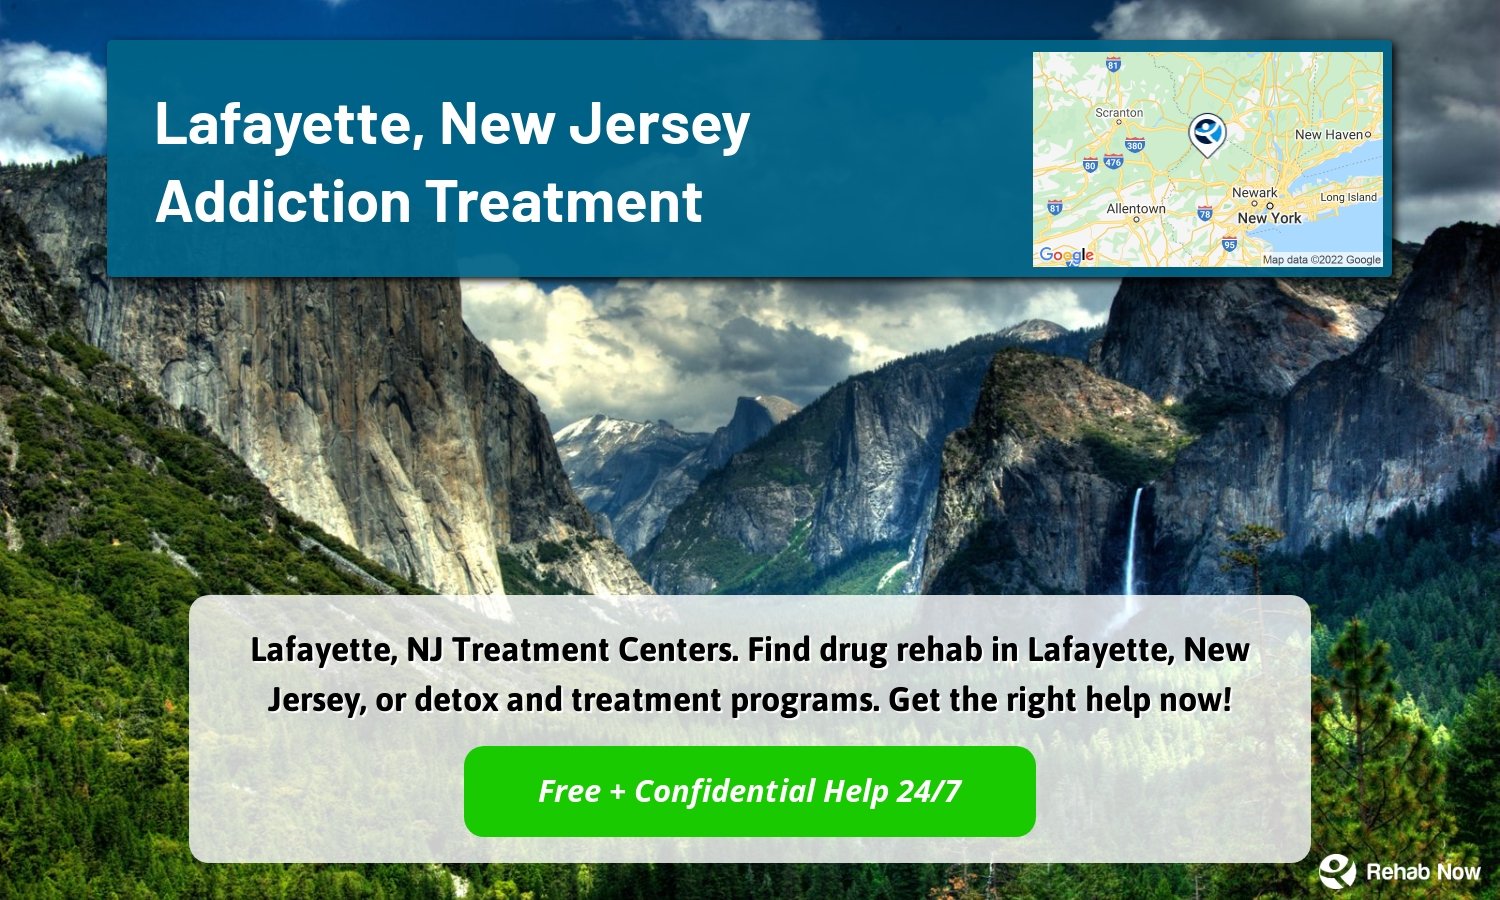 Lafayette, NJ Treatment Centers. Find drug rehab in Lafayette, New Jersey, or detox and treatment programs. Get the right help now!